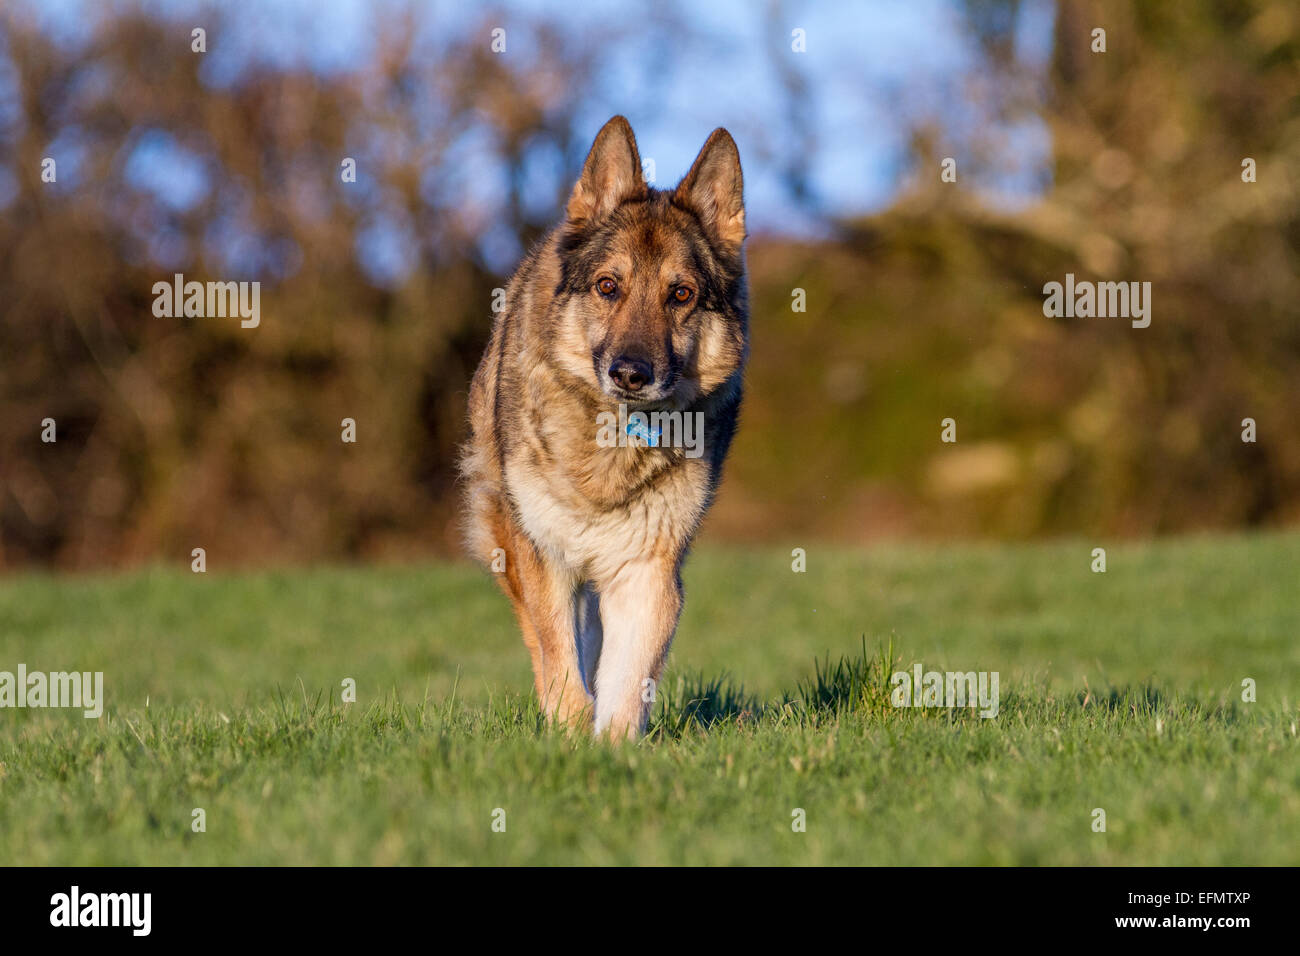 German Shepherd Dog on grass moving towards and looking straight at the camera. He has a collar and tag. Stock Photo